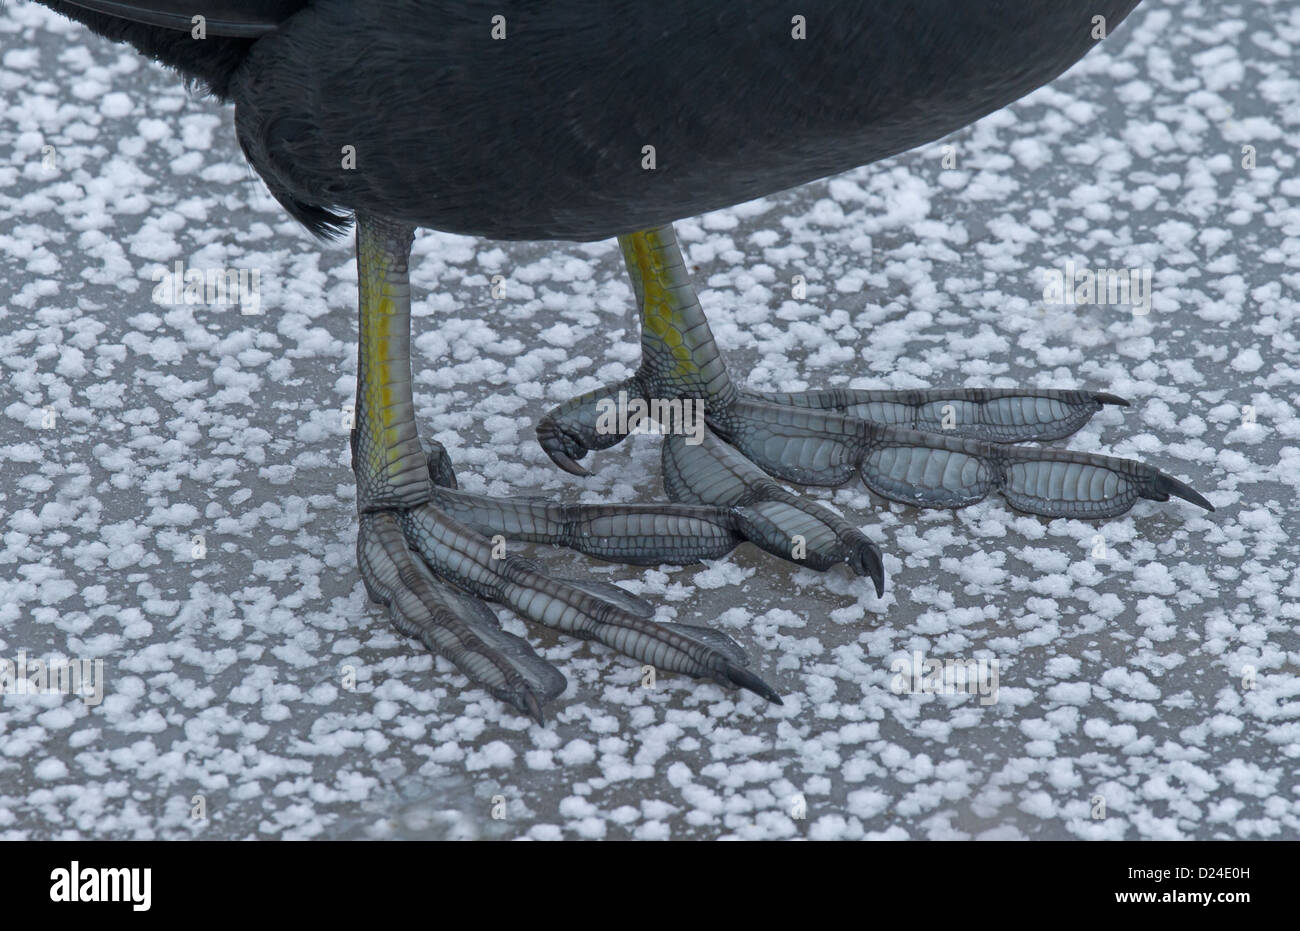 Common Coot (Fulica atra) adult, close-up of lobed feet, standing on ice, Merseyside, England, december Stock Photo